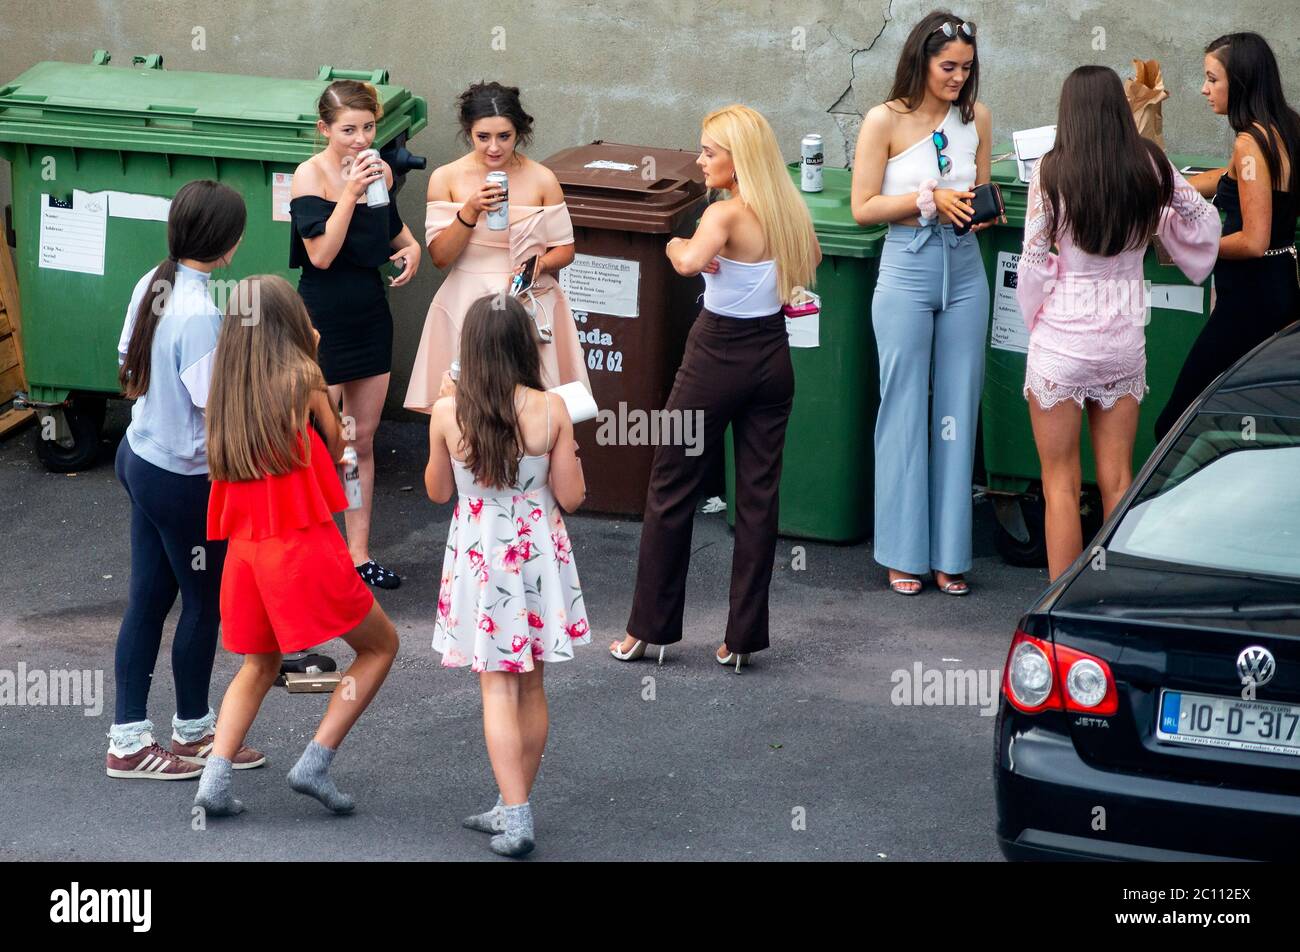 Young women and teenagers in smart prom dresses drinking alcohol beer illegally in back garden public car park parking lot before going to their graduation party as a social problem issue. Stock Photo